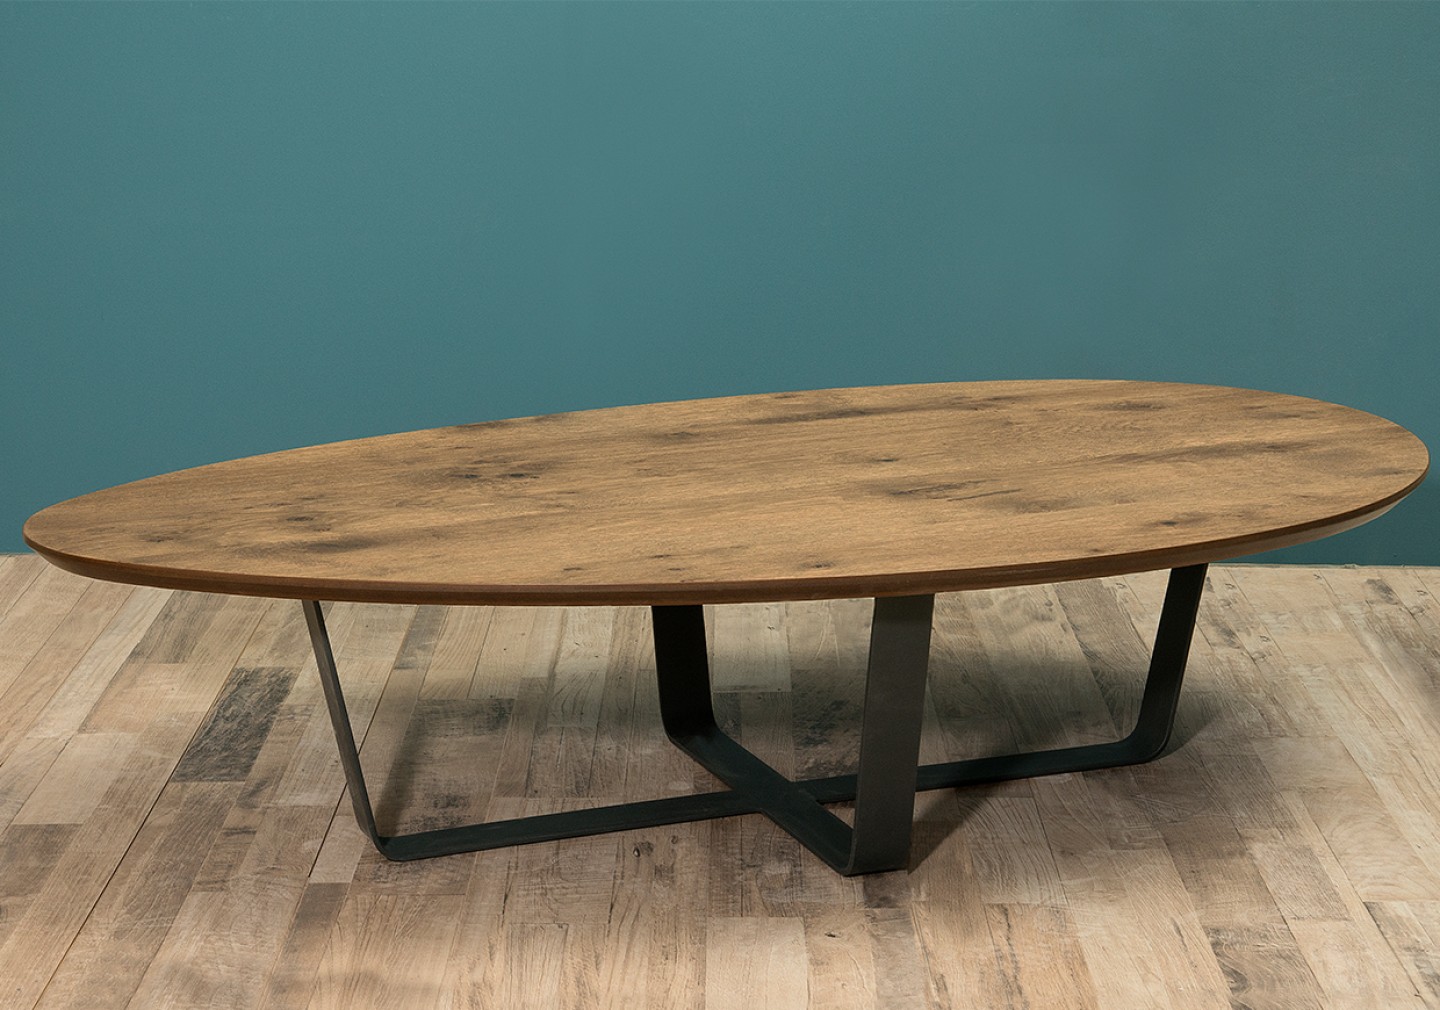 THE STONE COFFEE TABLE